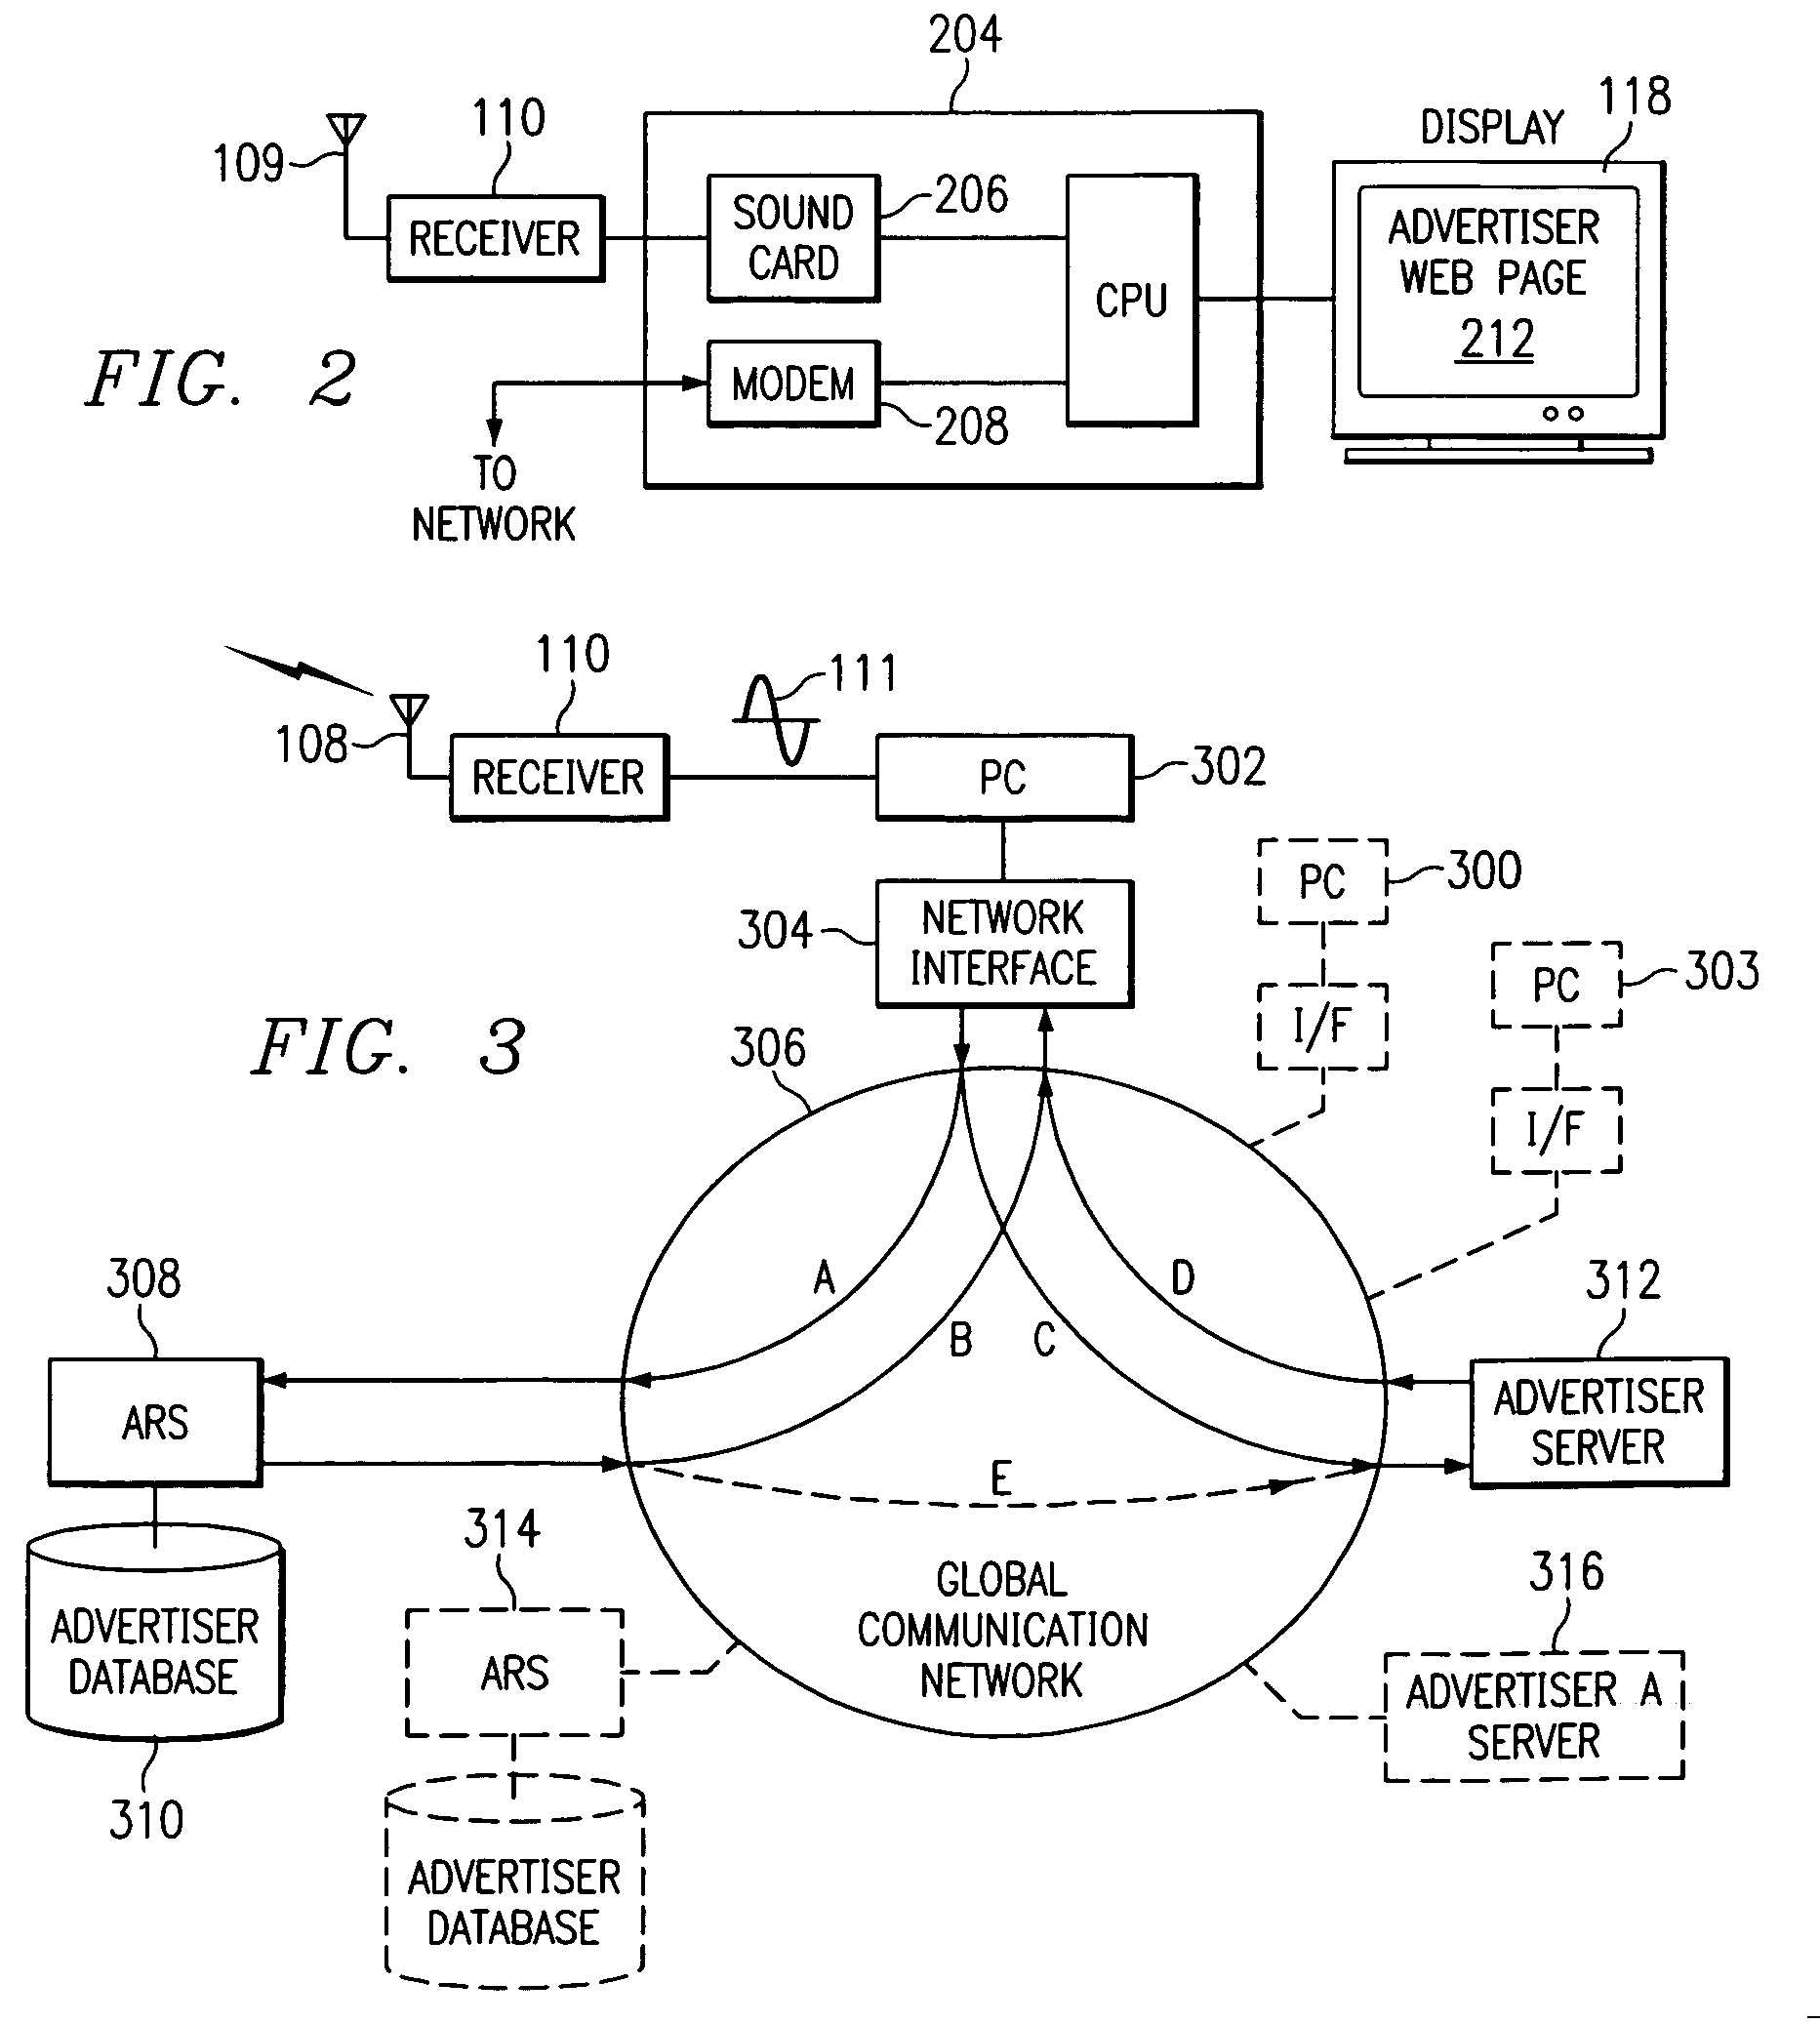 Software downloading using a television broadcast channel